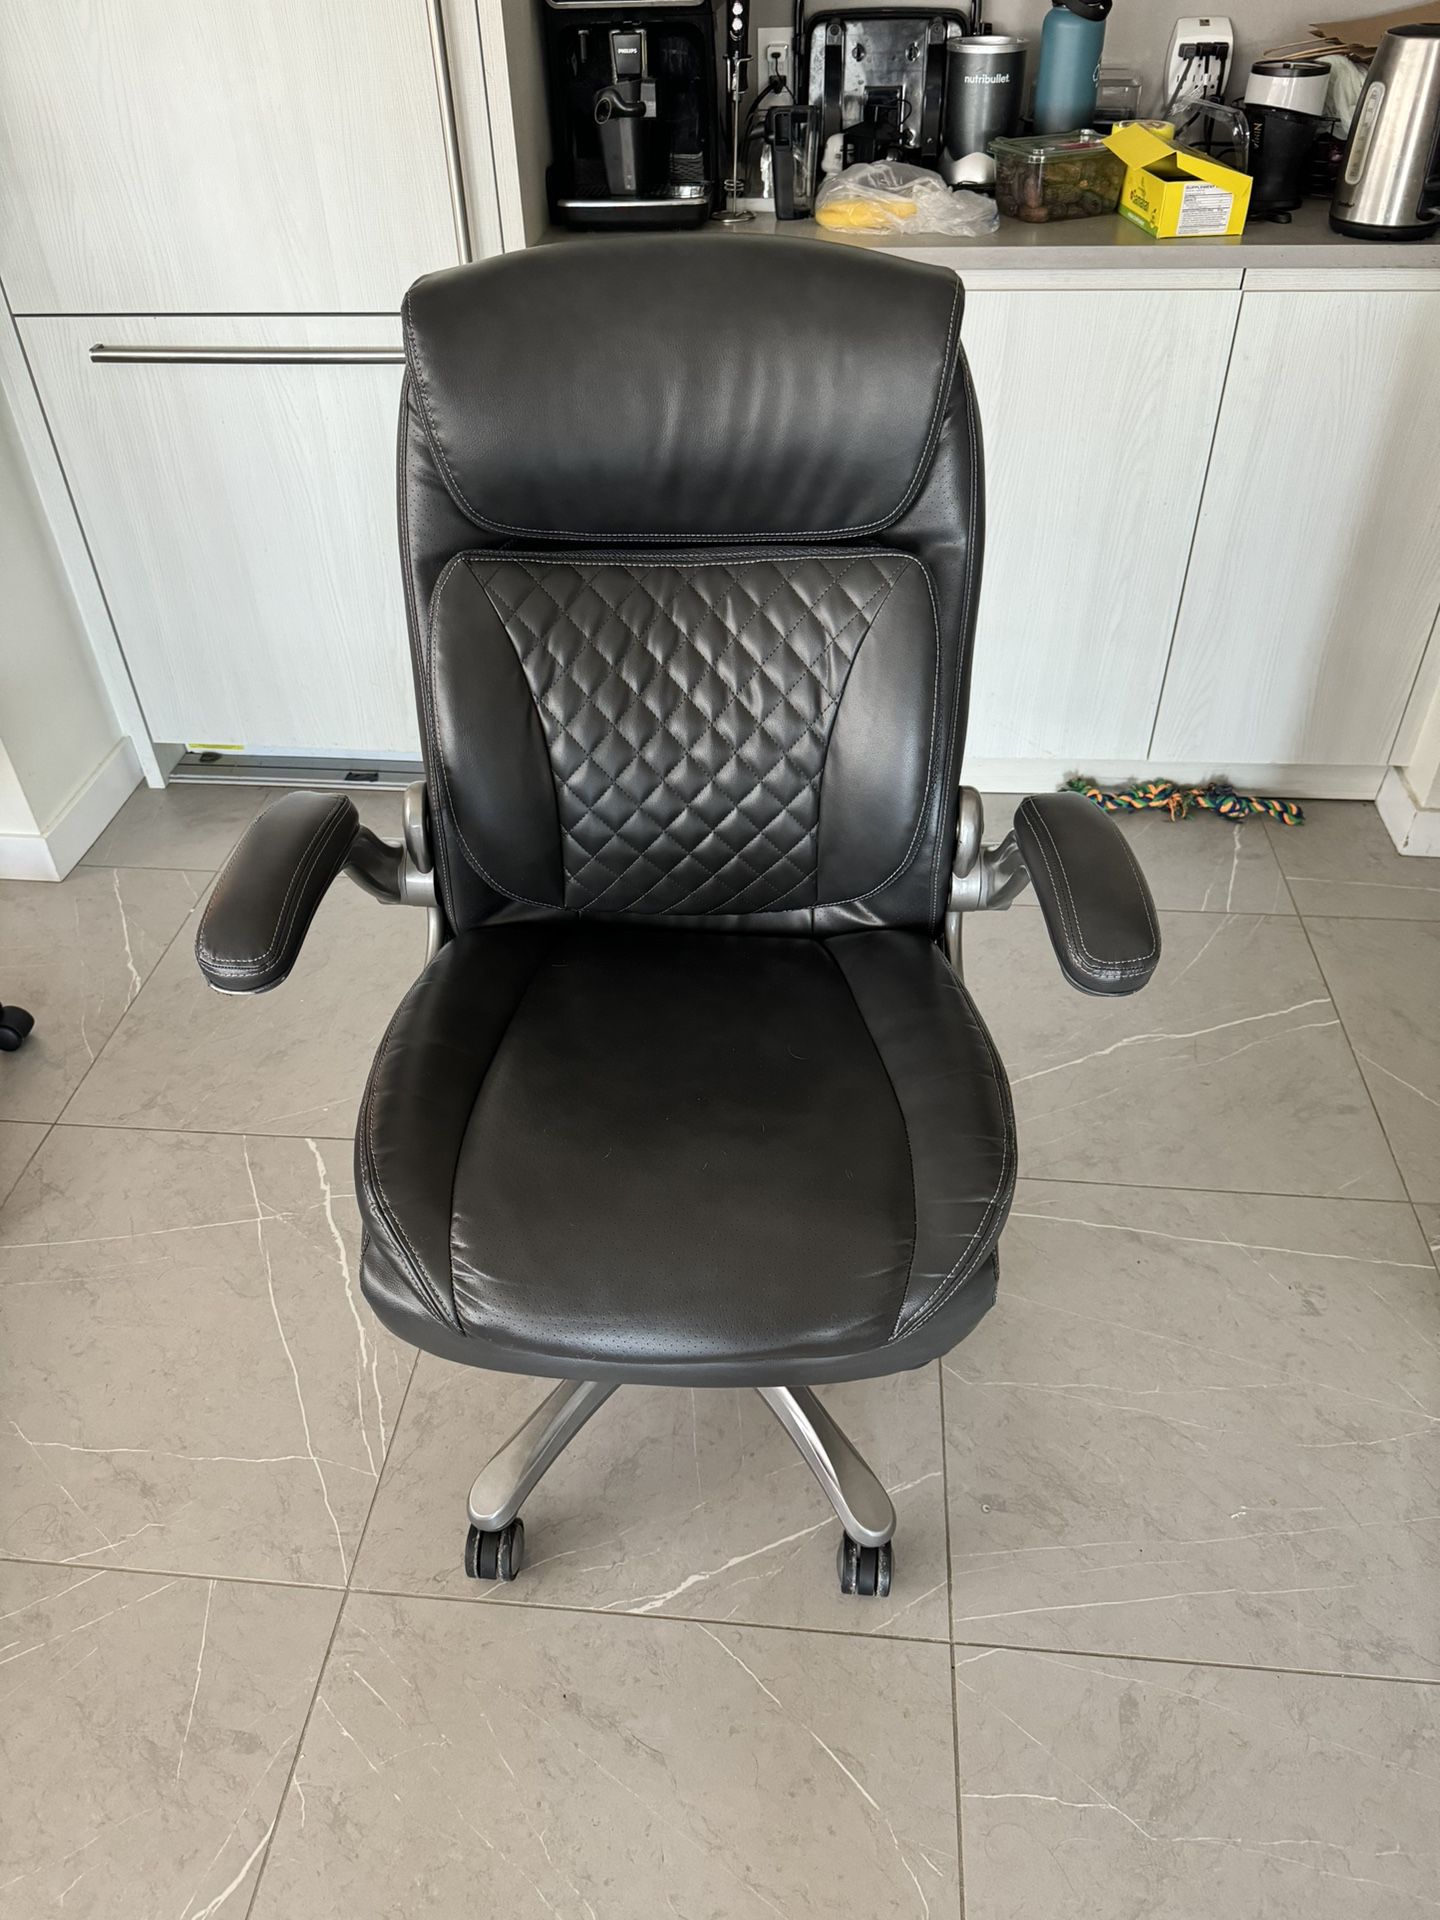 Office Desk Chair - Great Condition - Price negotiable